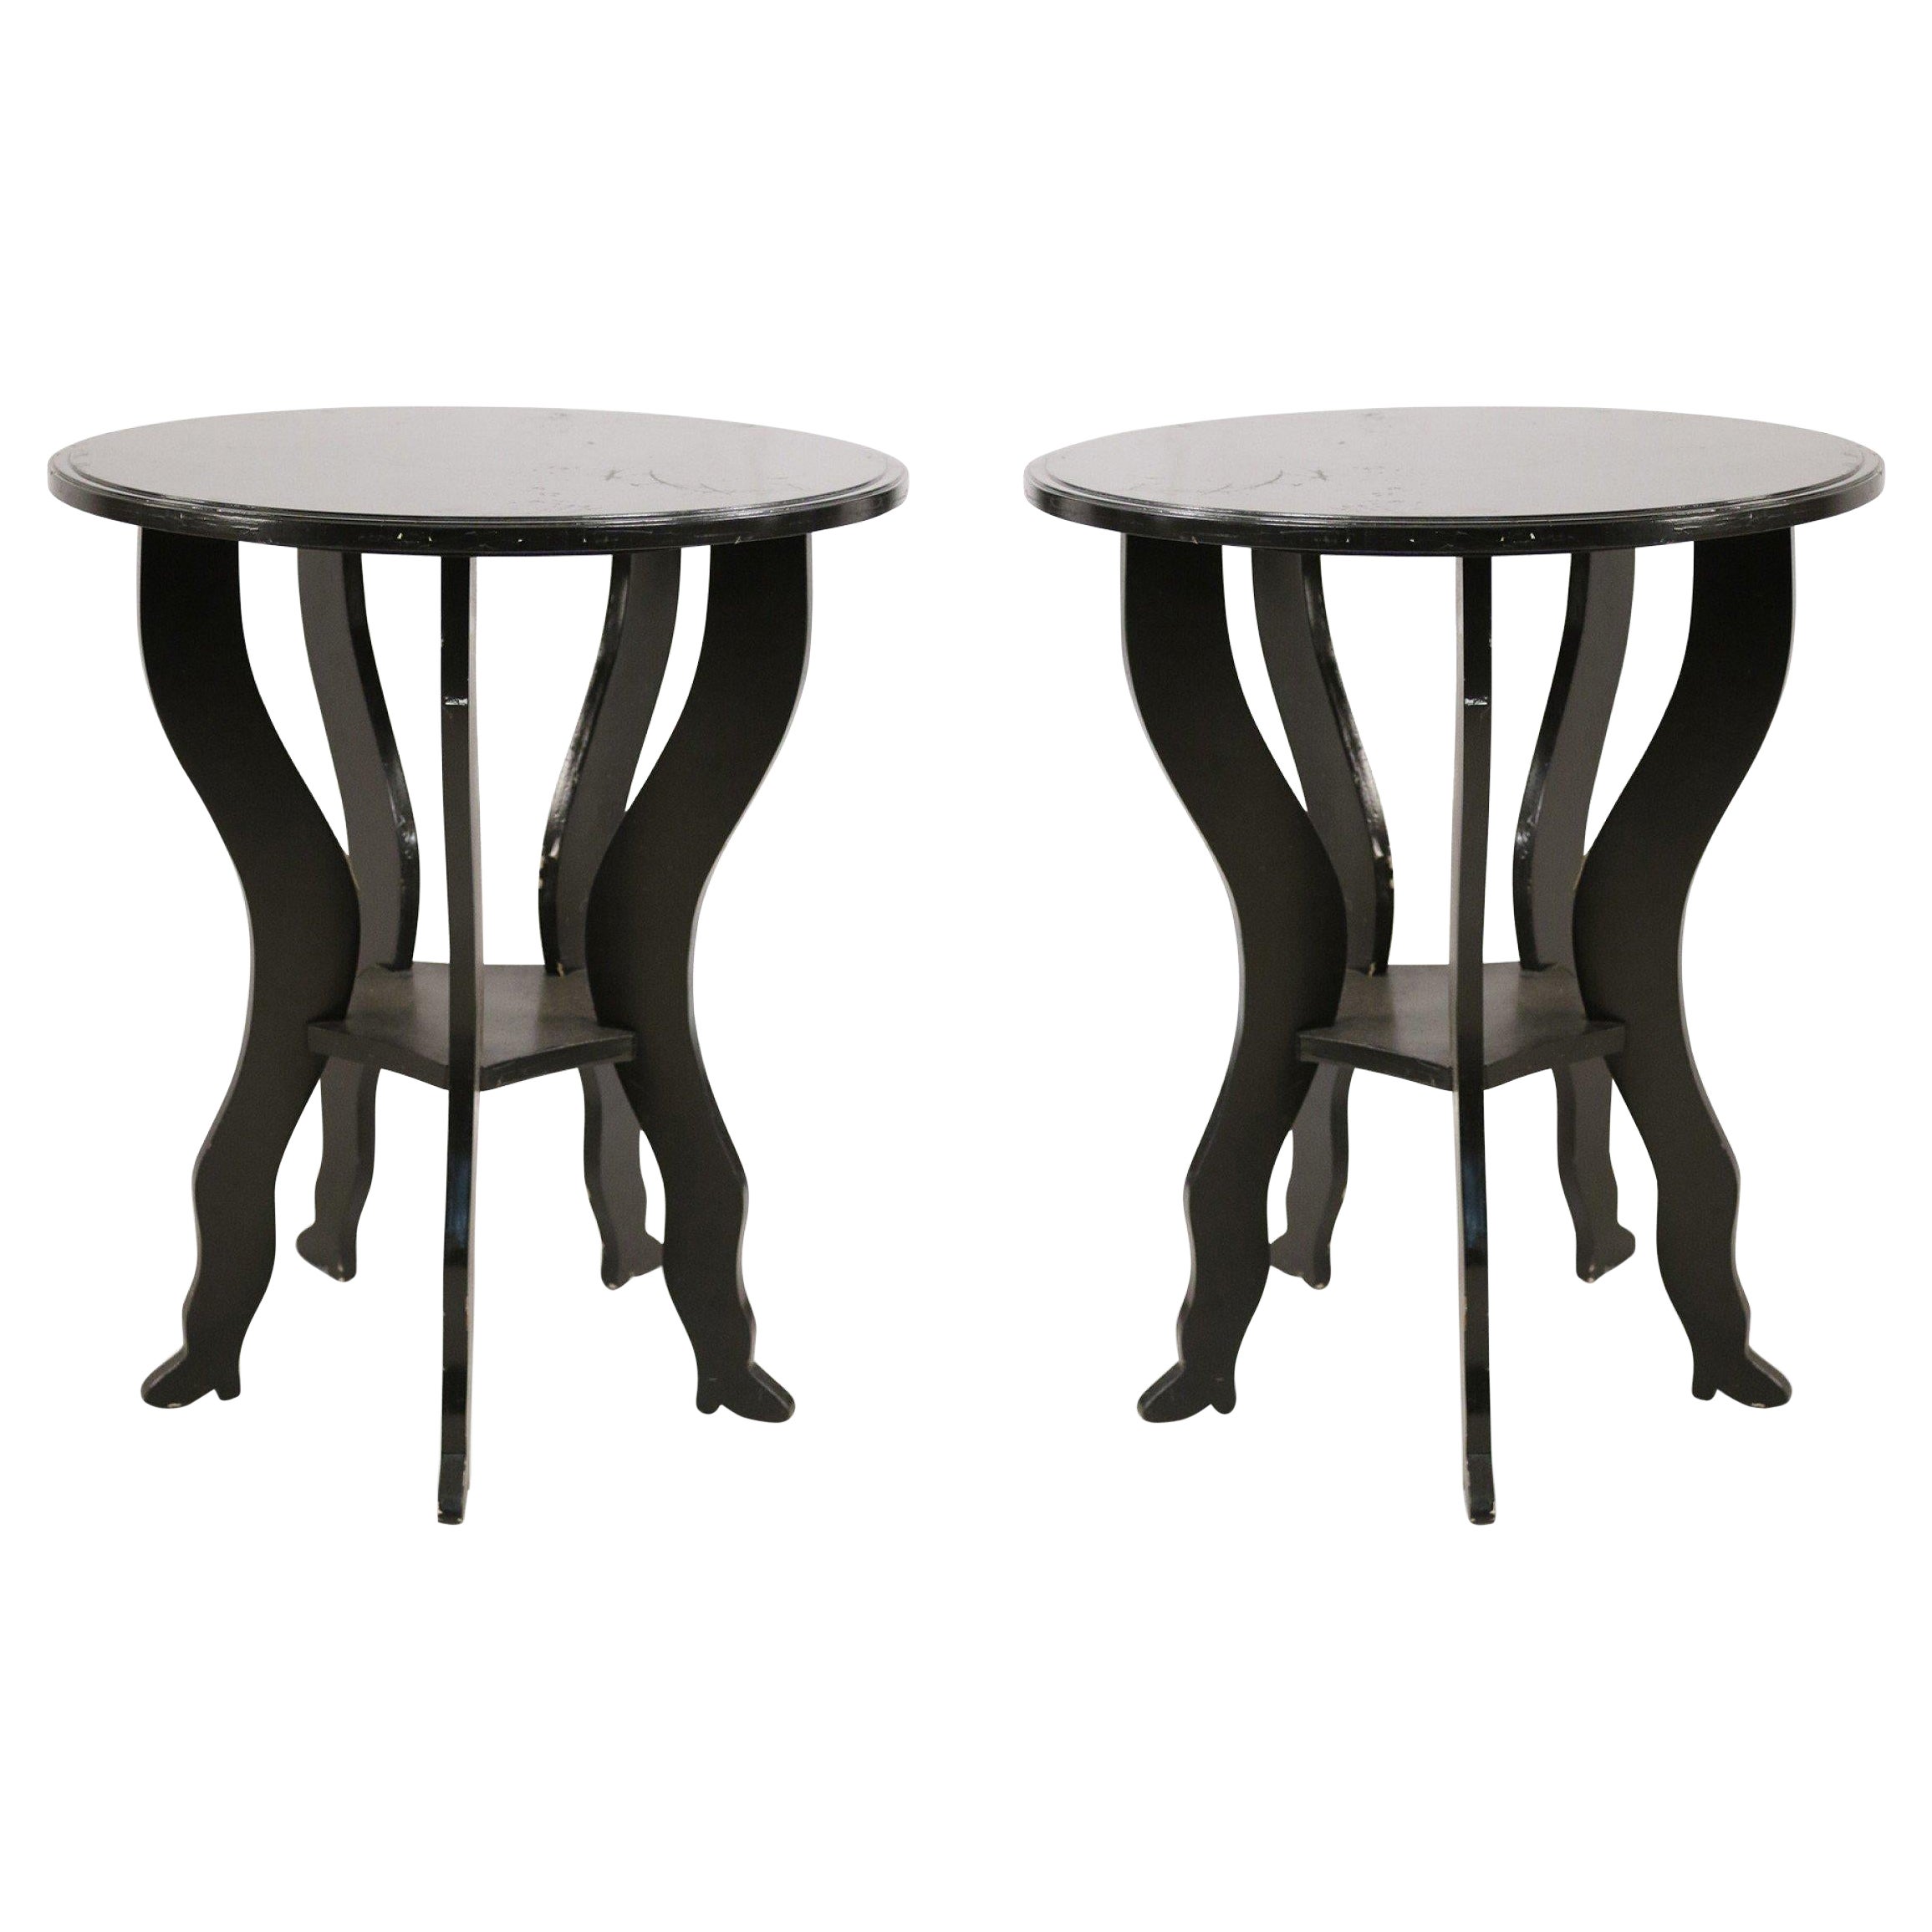 Pair of Contemporary Black Painted Large Circular End Tables